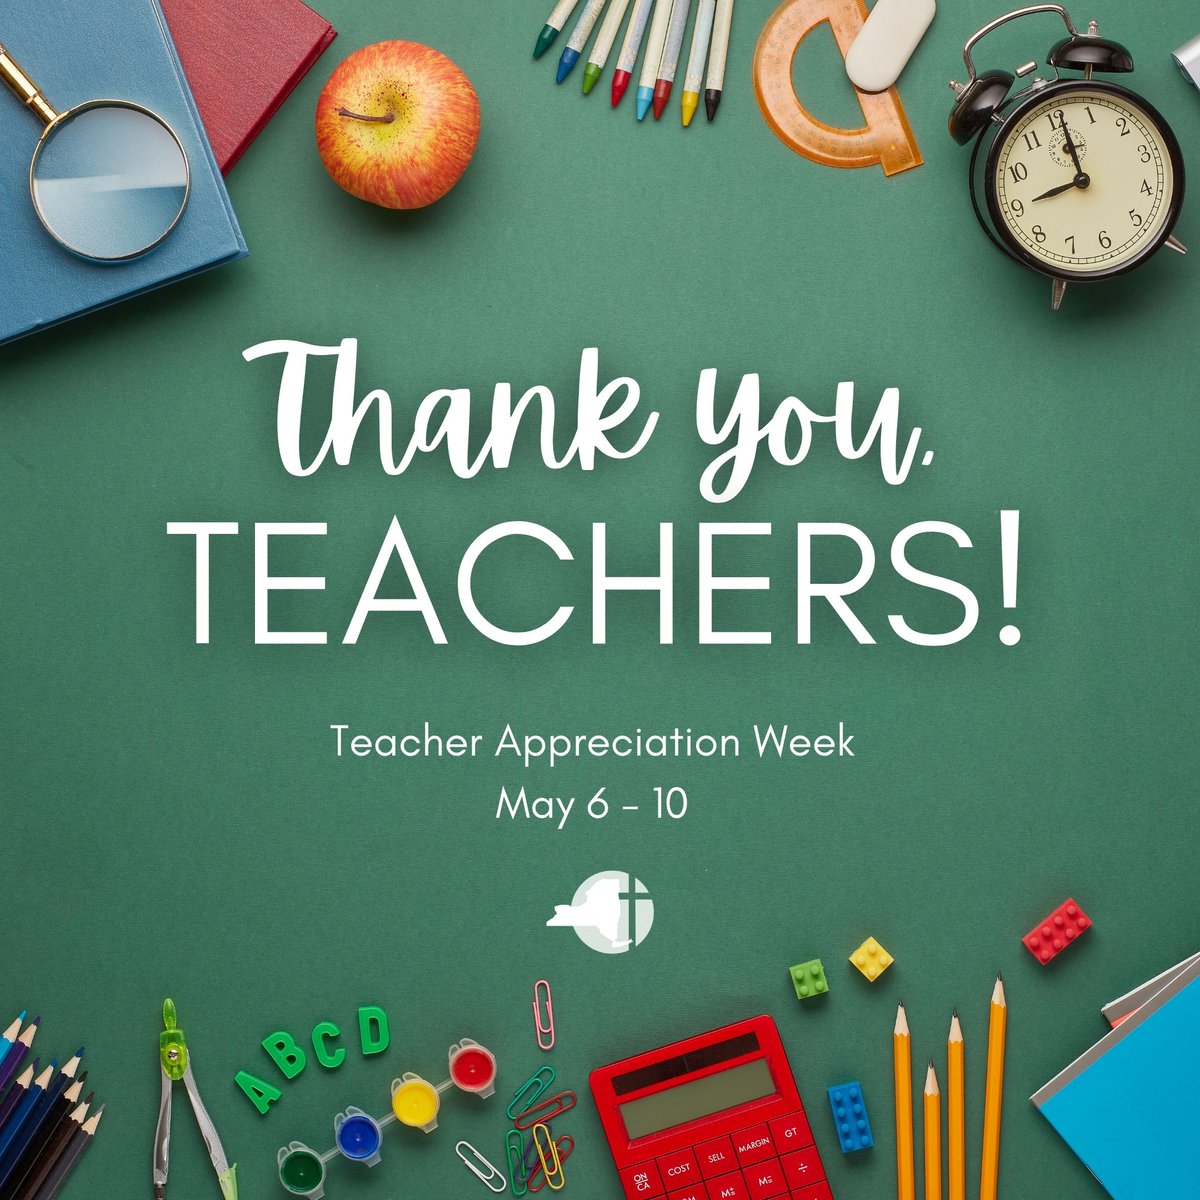 Thank you to all of our #educators who are dedicated to teaching the leaders of tomorrow! 

#teachersappreciation #catholicschools #schoolchoice